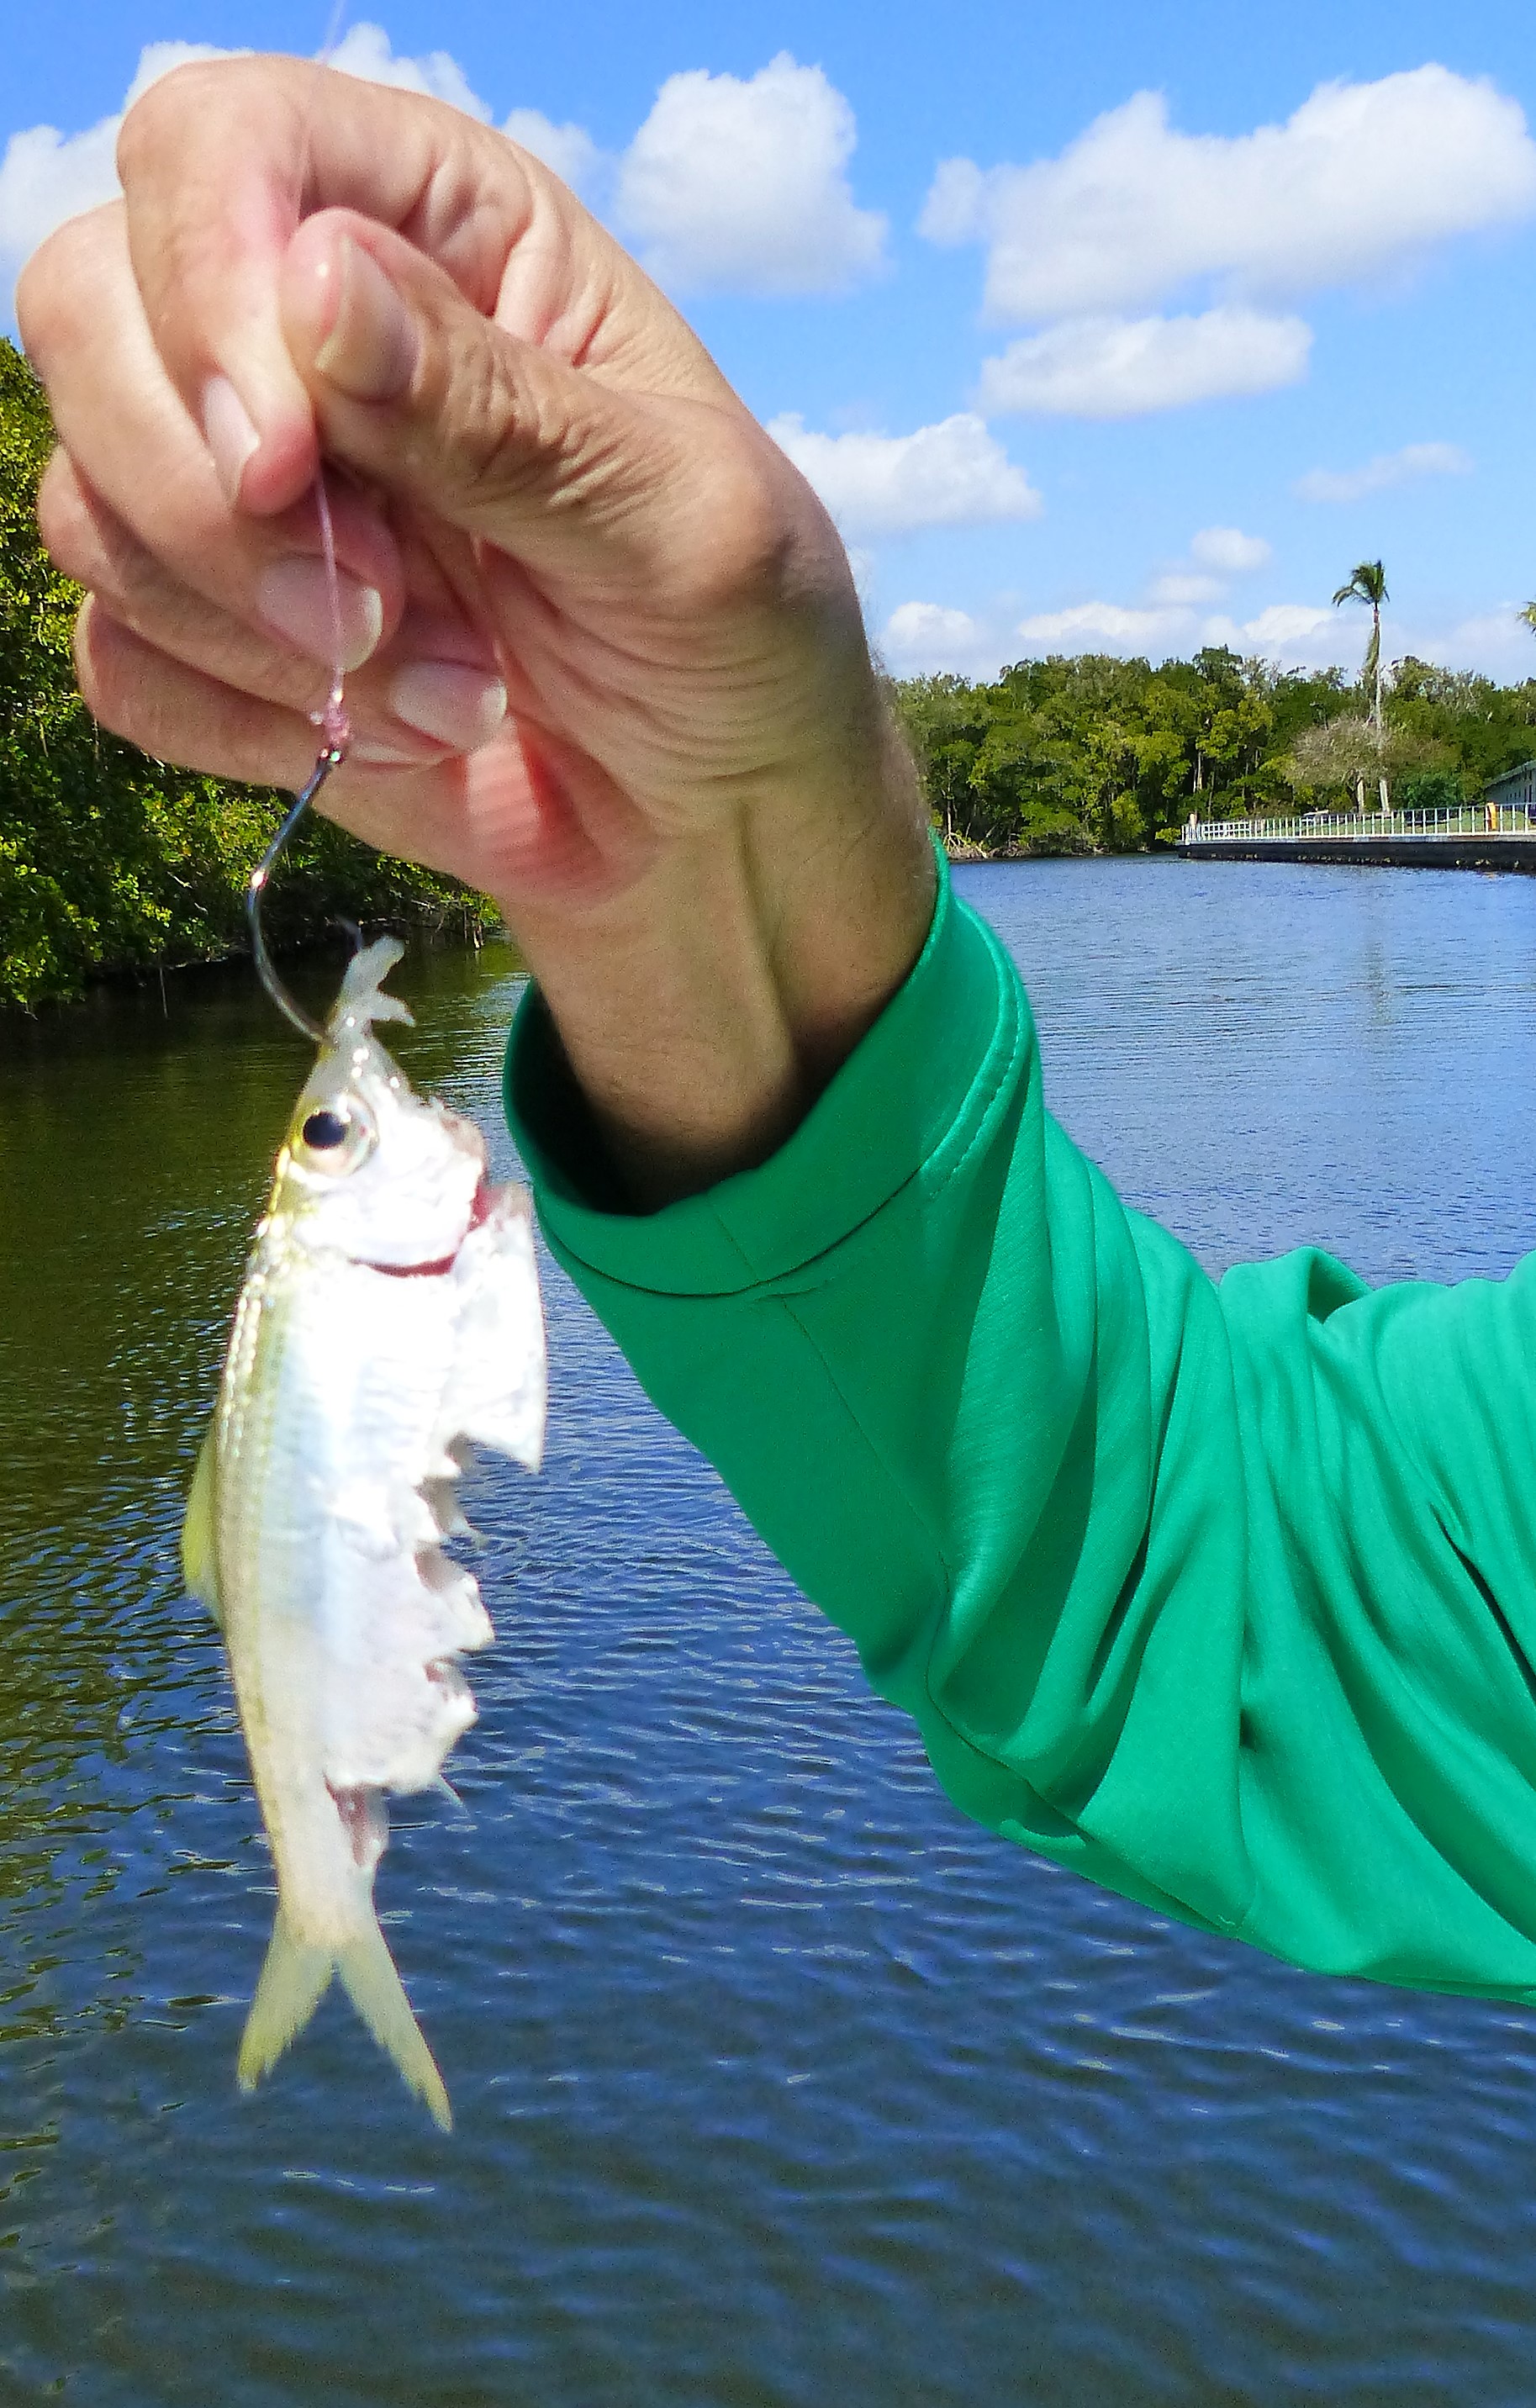 Snook on the Hook – Sanibel Island, Florida | Share the Outdoors